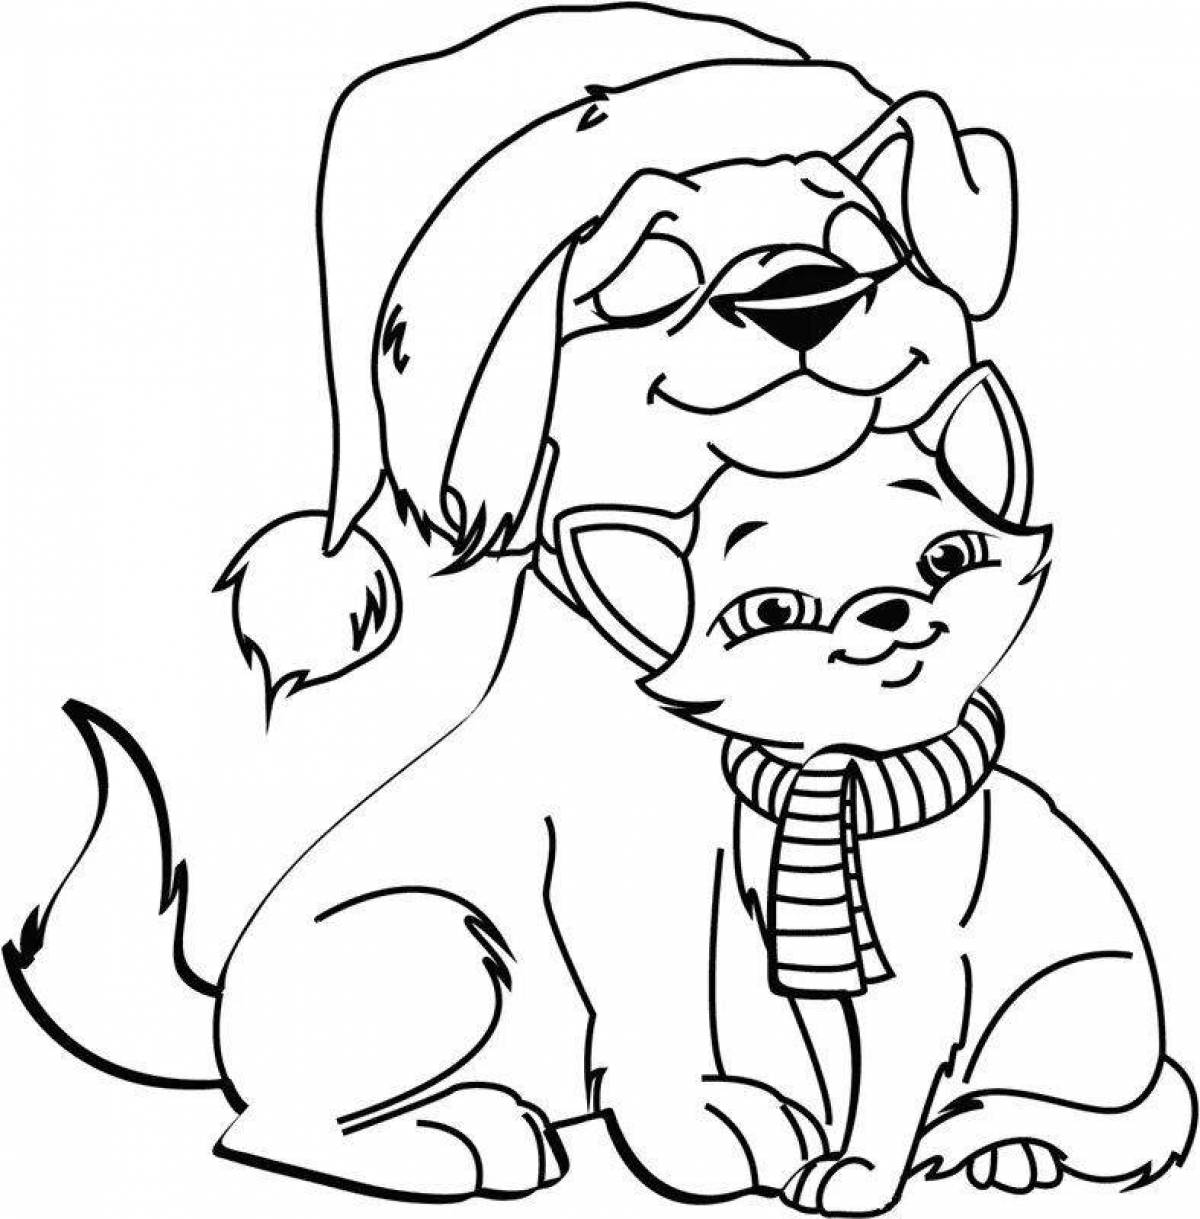 Fluffy dog ​​and cat coloring pages for kids